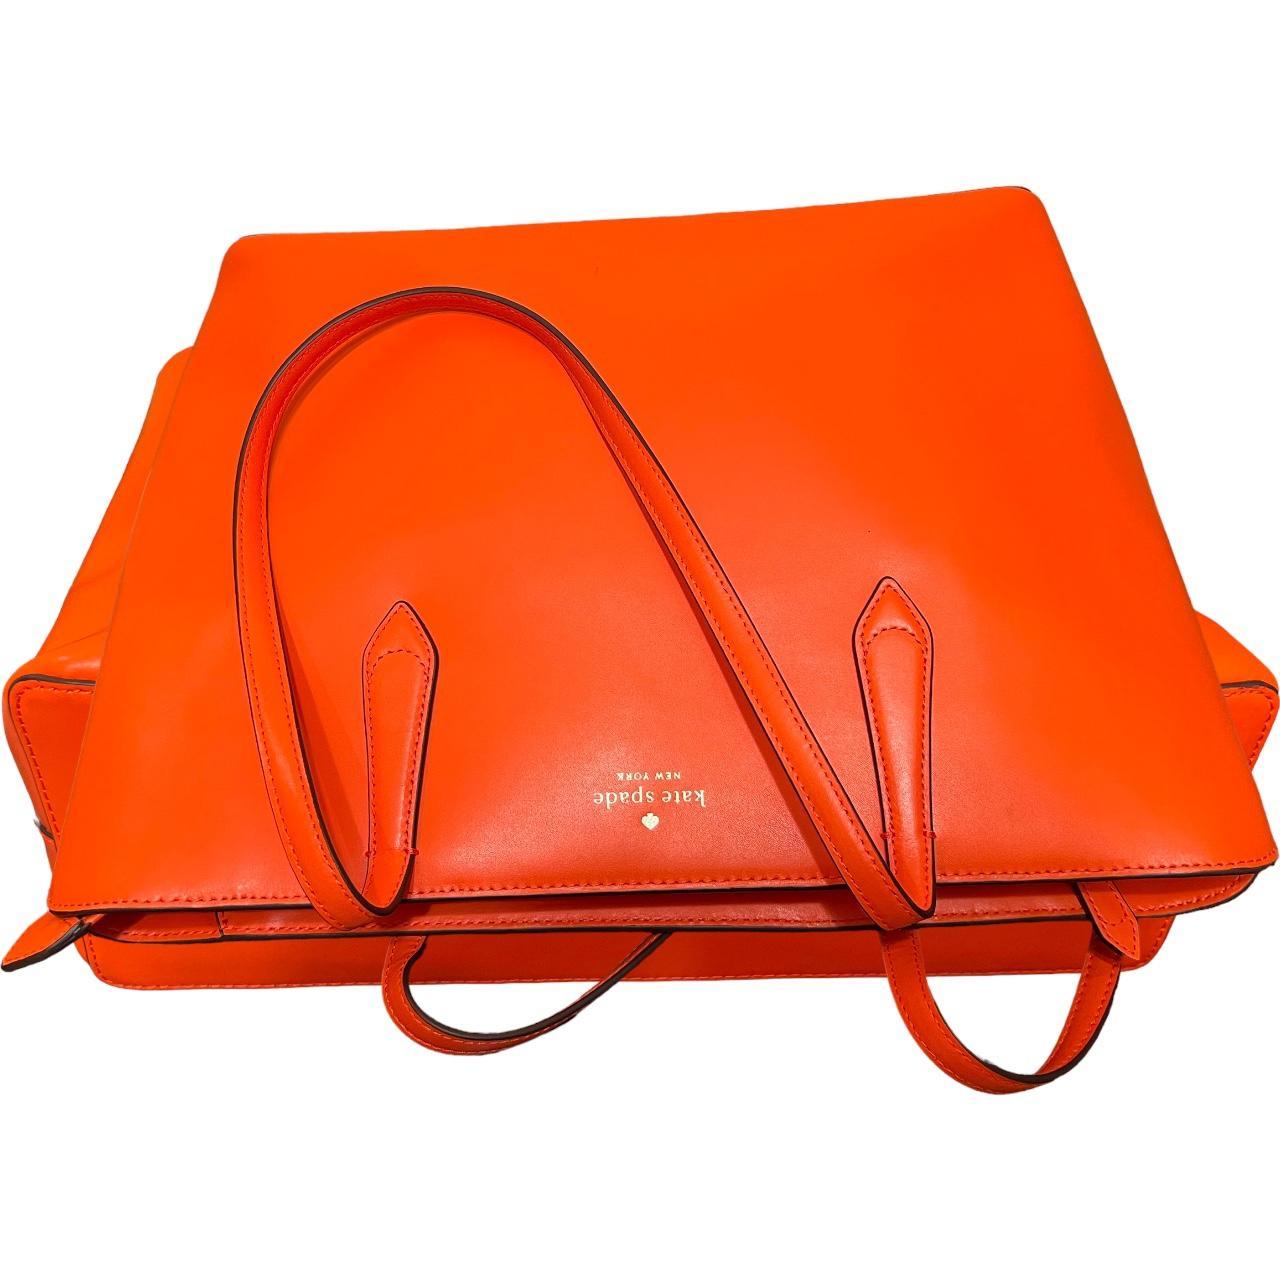 SOLD! Lovely Kate Spade Orange and White Purse